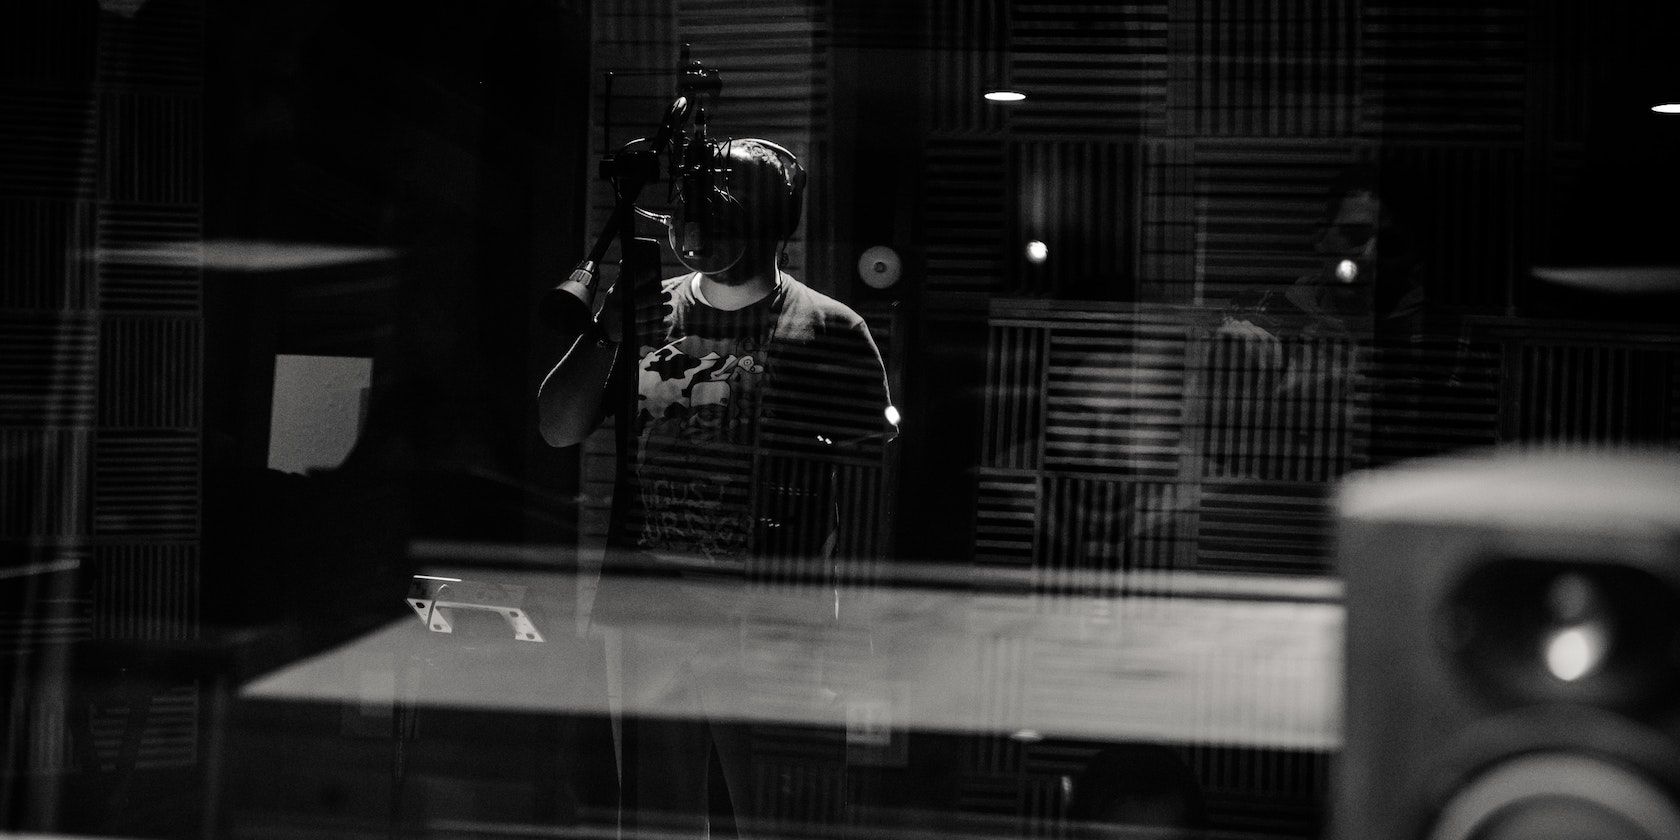 A person singing in a music studio.